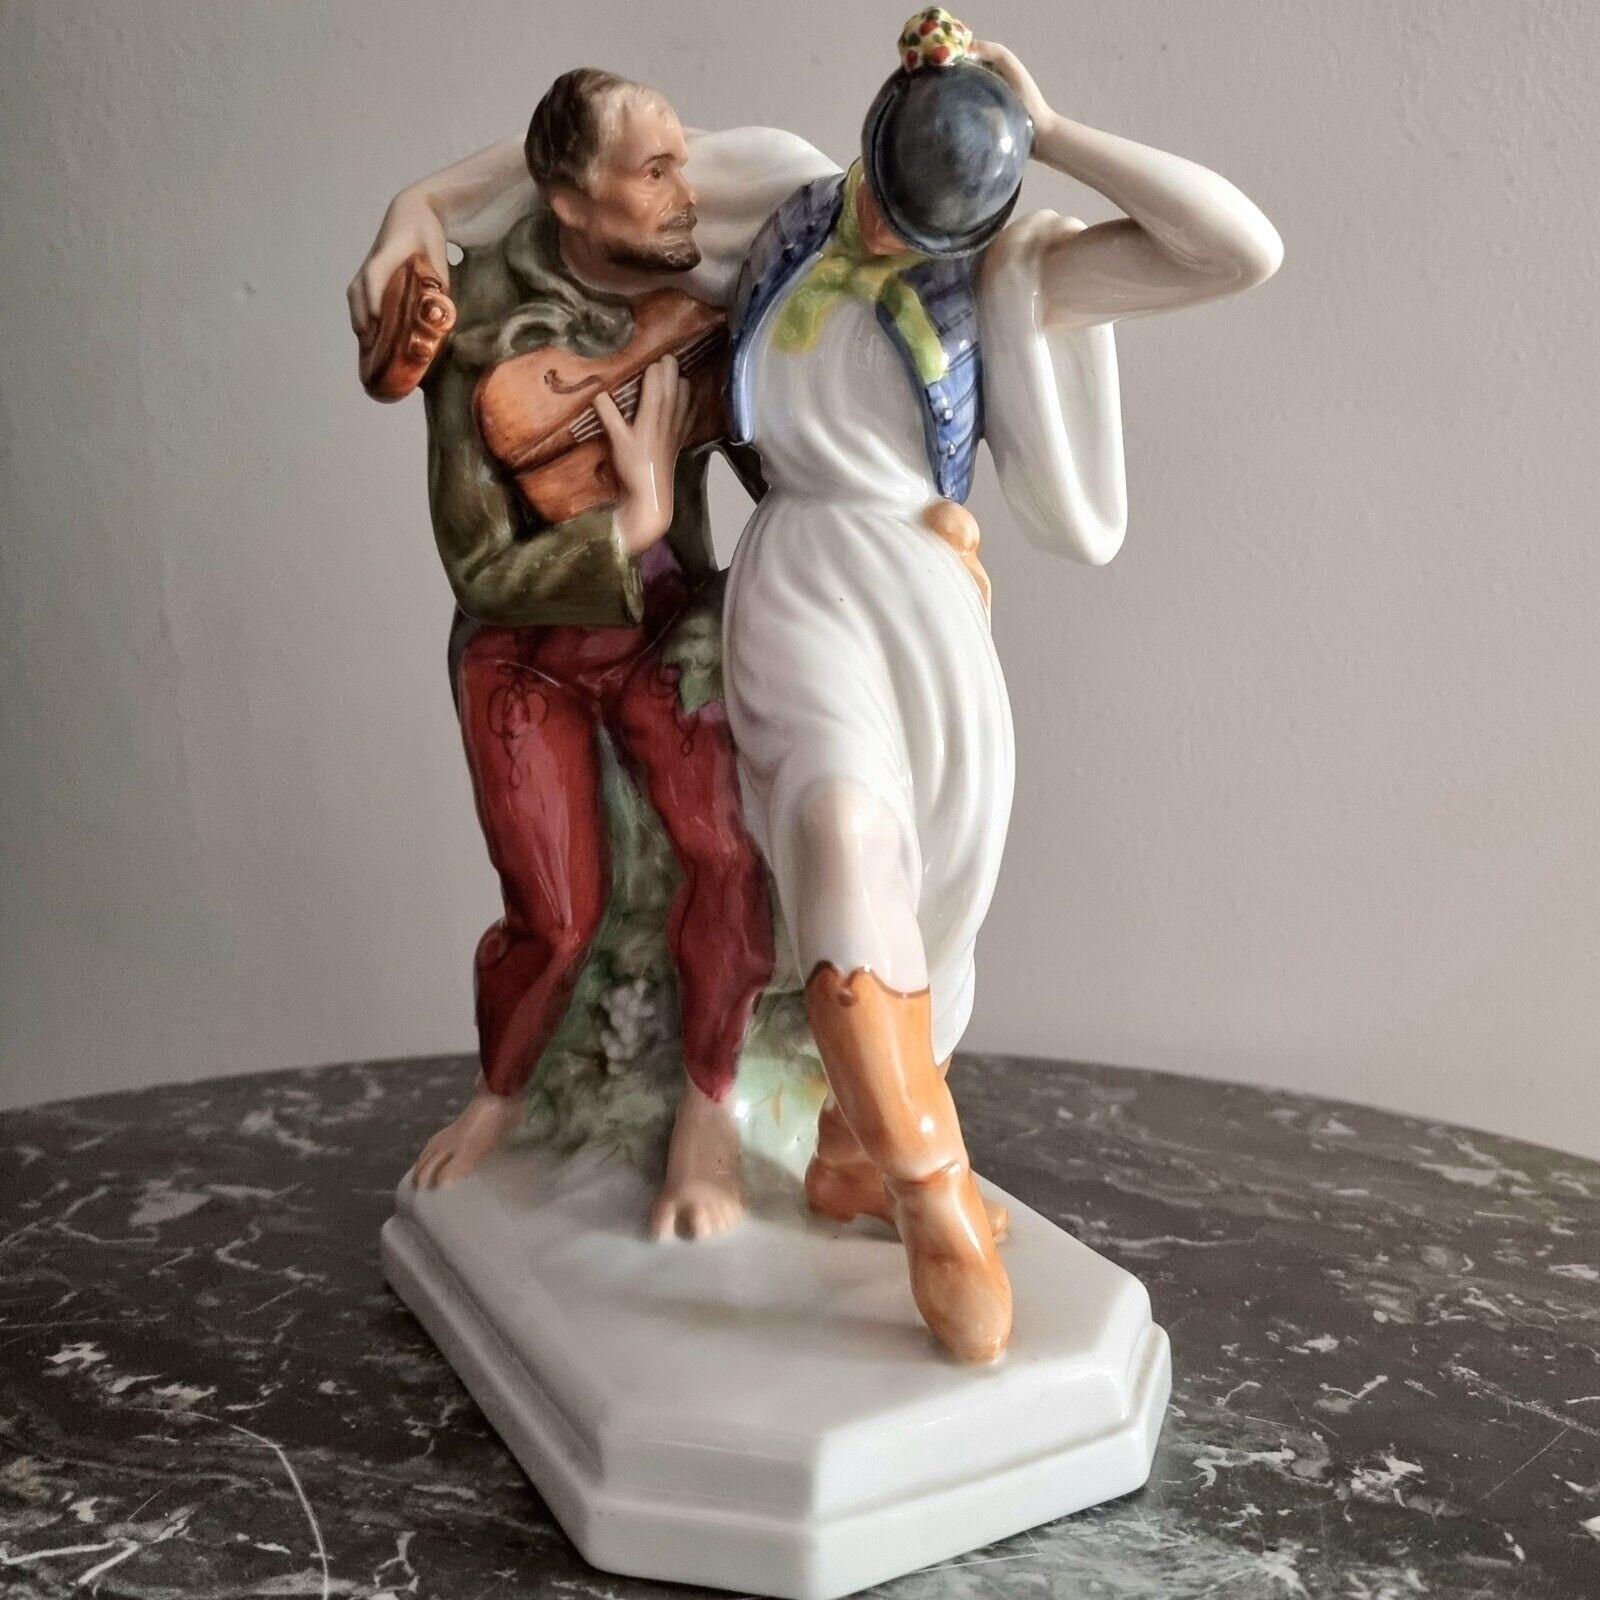 HEREND 1940, signed, numbered,
Porcelain statuette 'Musicians',
Vintage,
height 22 cm, weight 918 g, socle 16 x 9,8 cm,
good condition.

Herend was founded in 1826 and has had much famous customers who bought it's porcelain. At the first World's